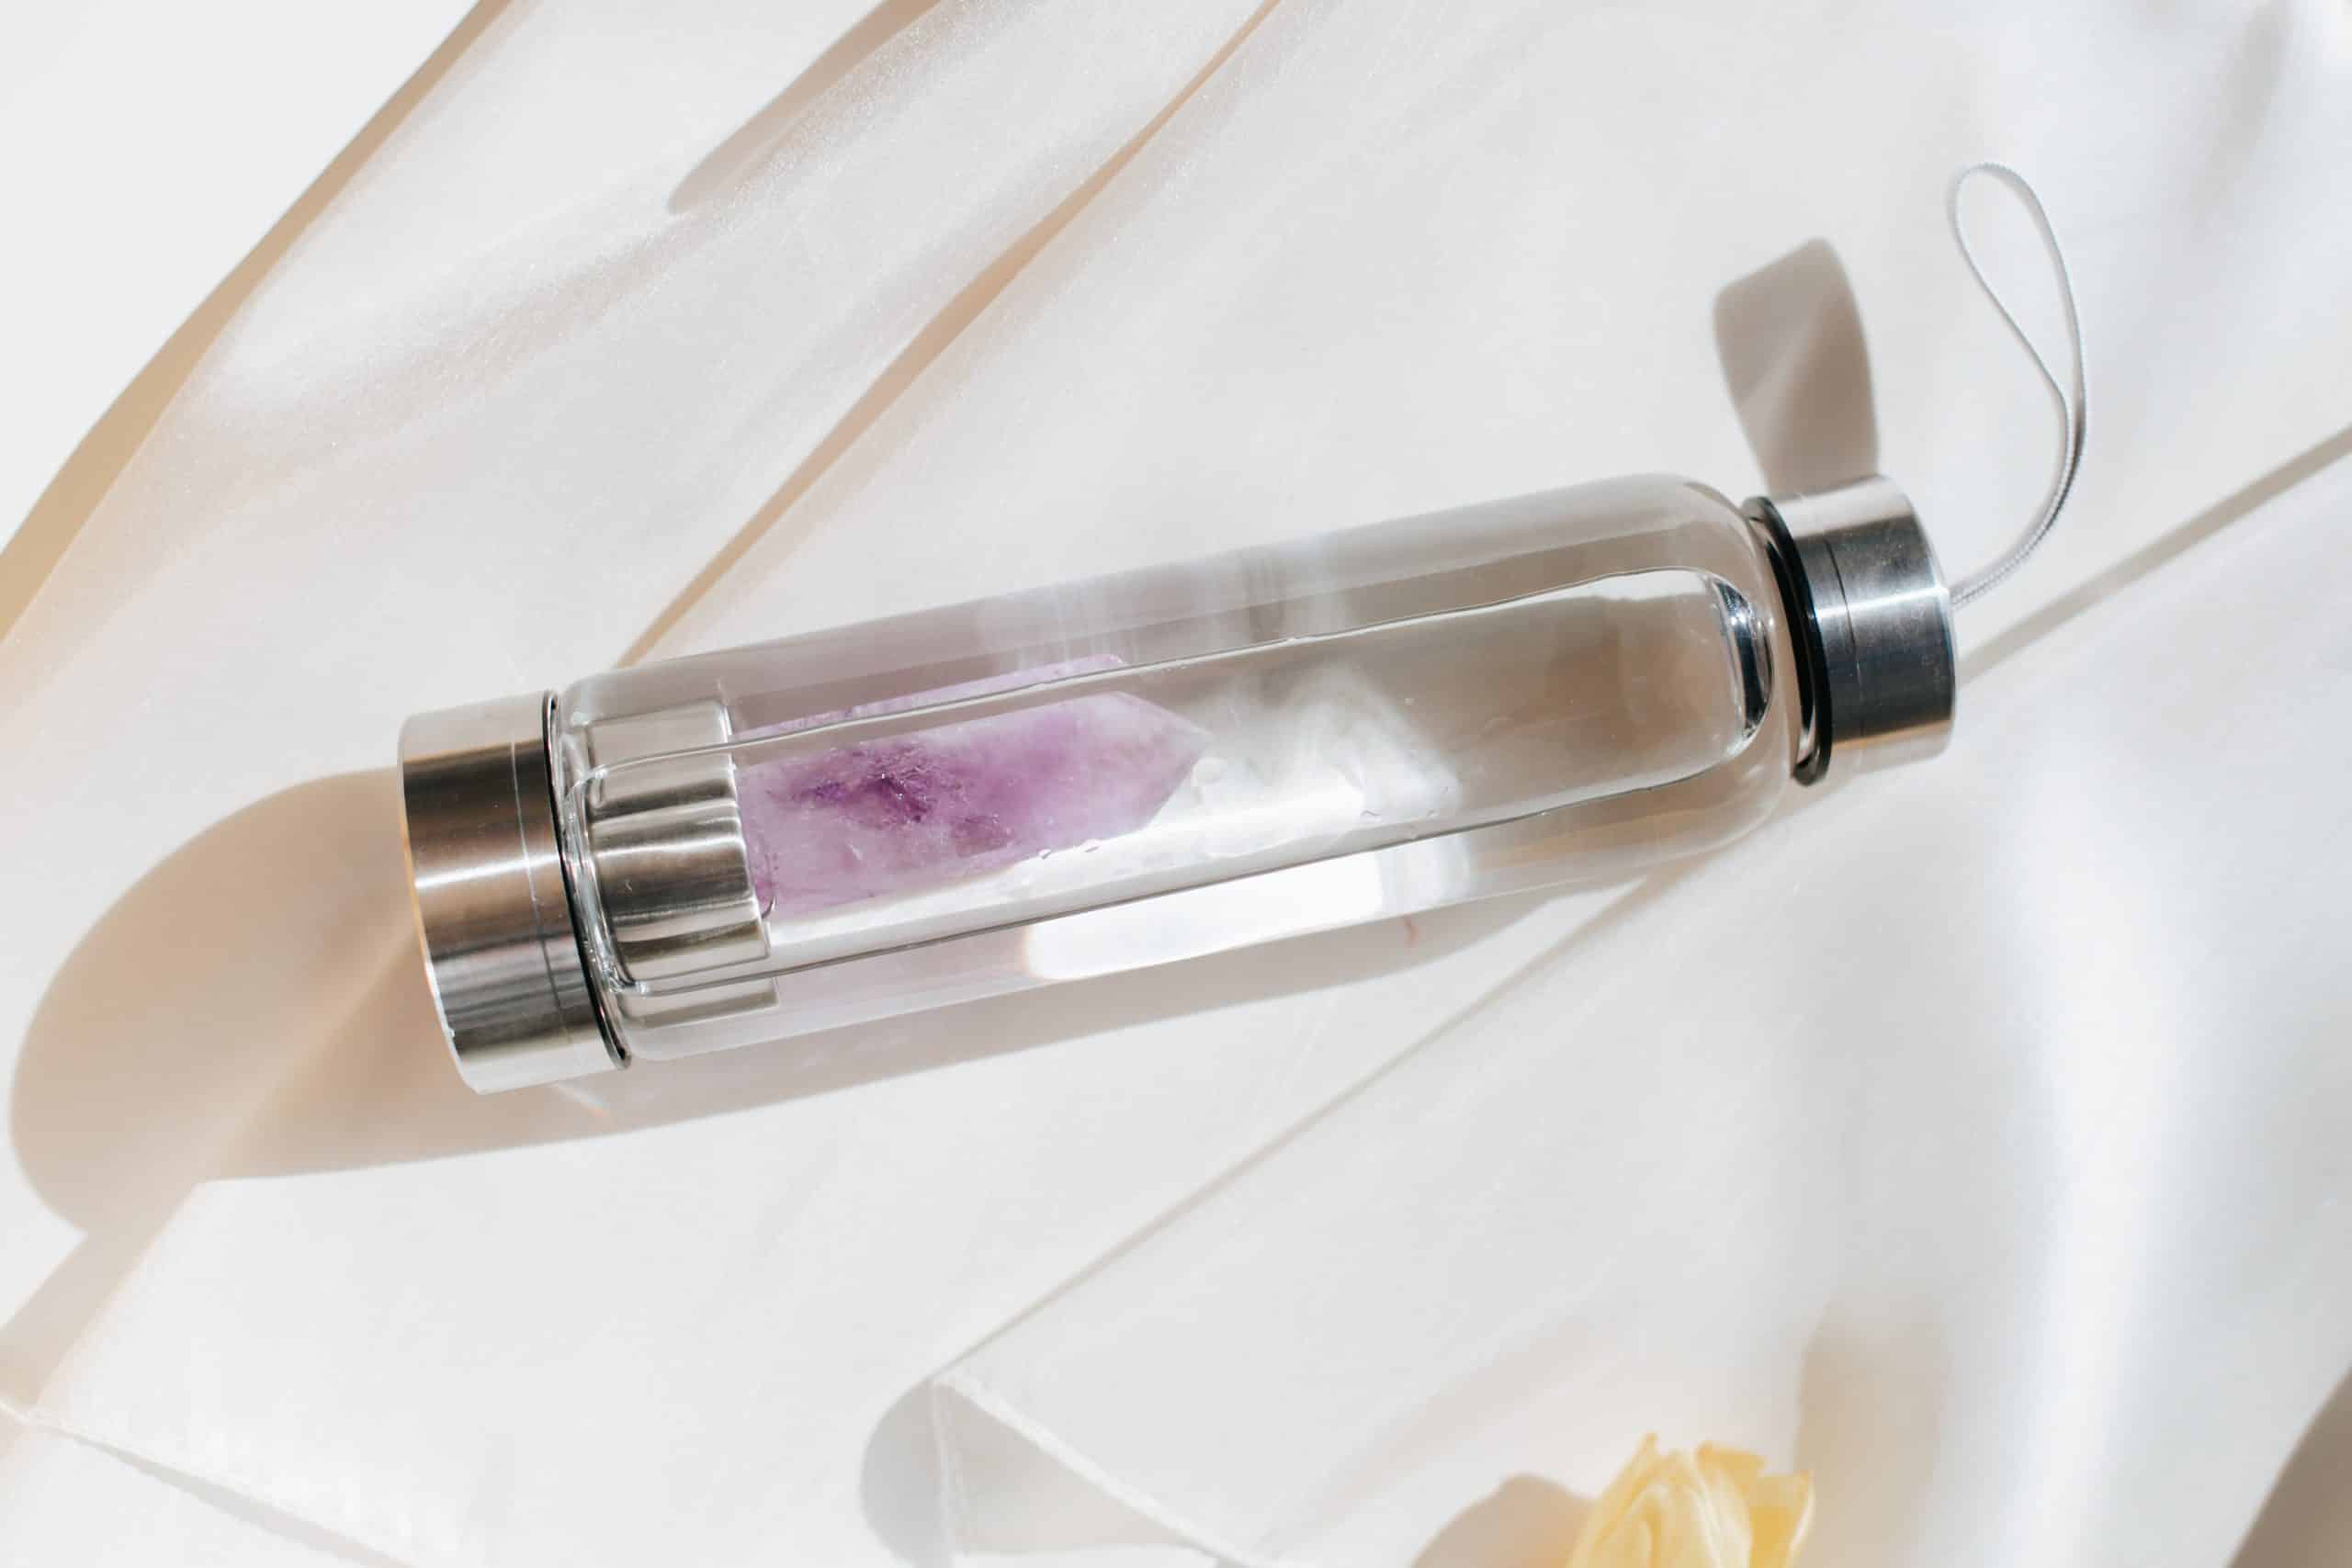 Crystal Water Bottles Are The Wellness Trend We Can Get Behind